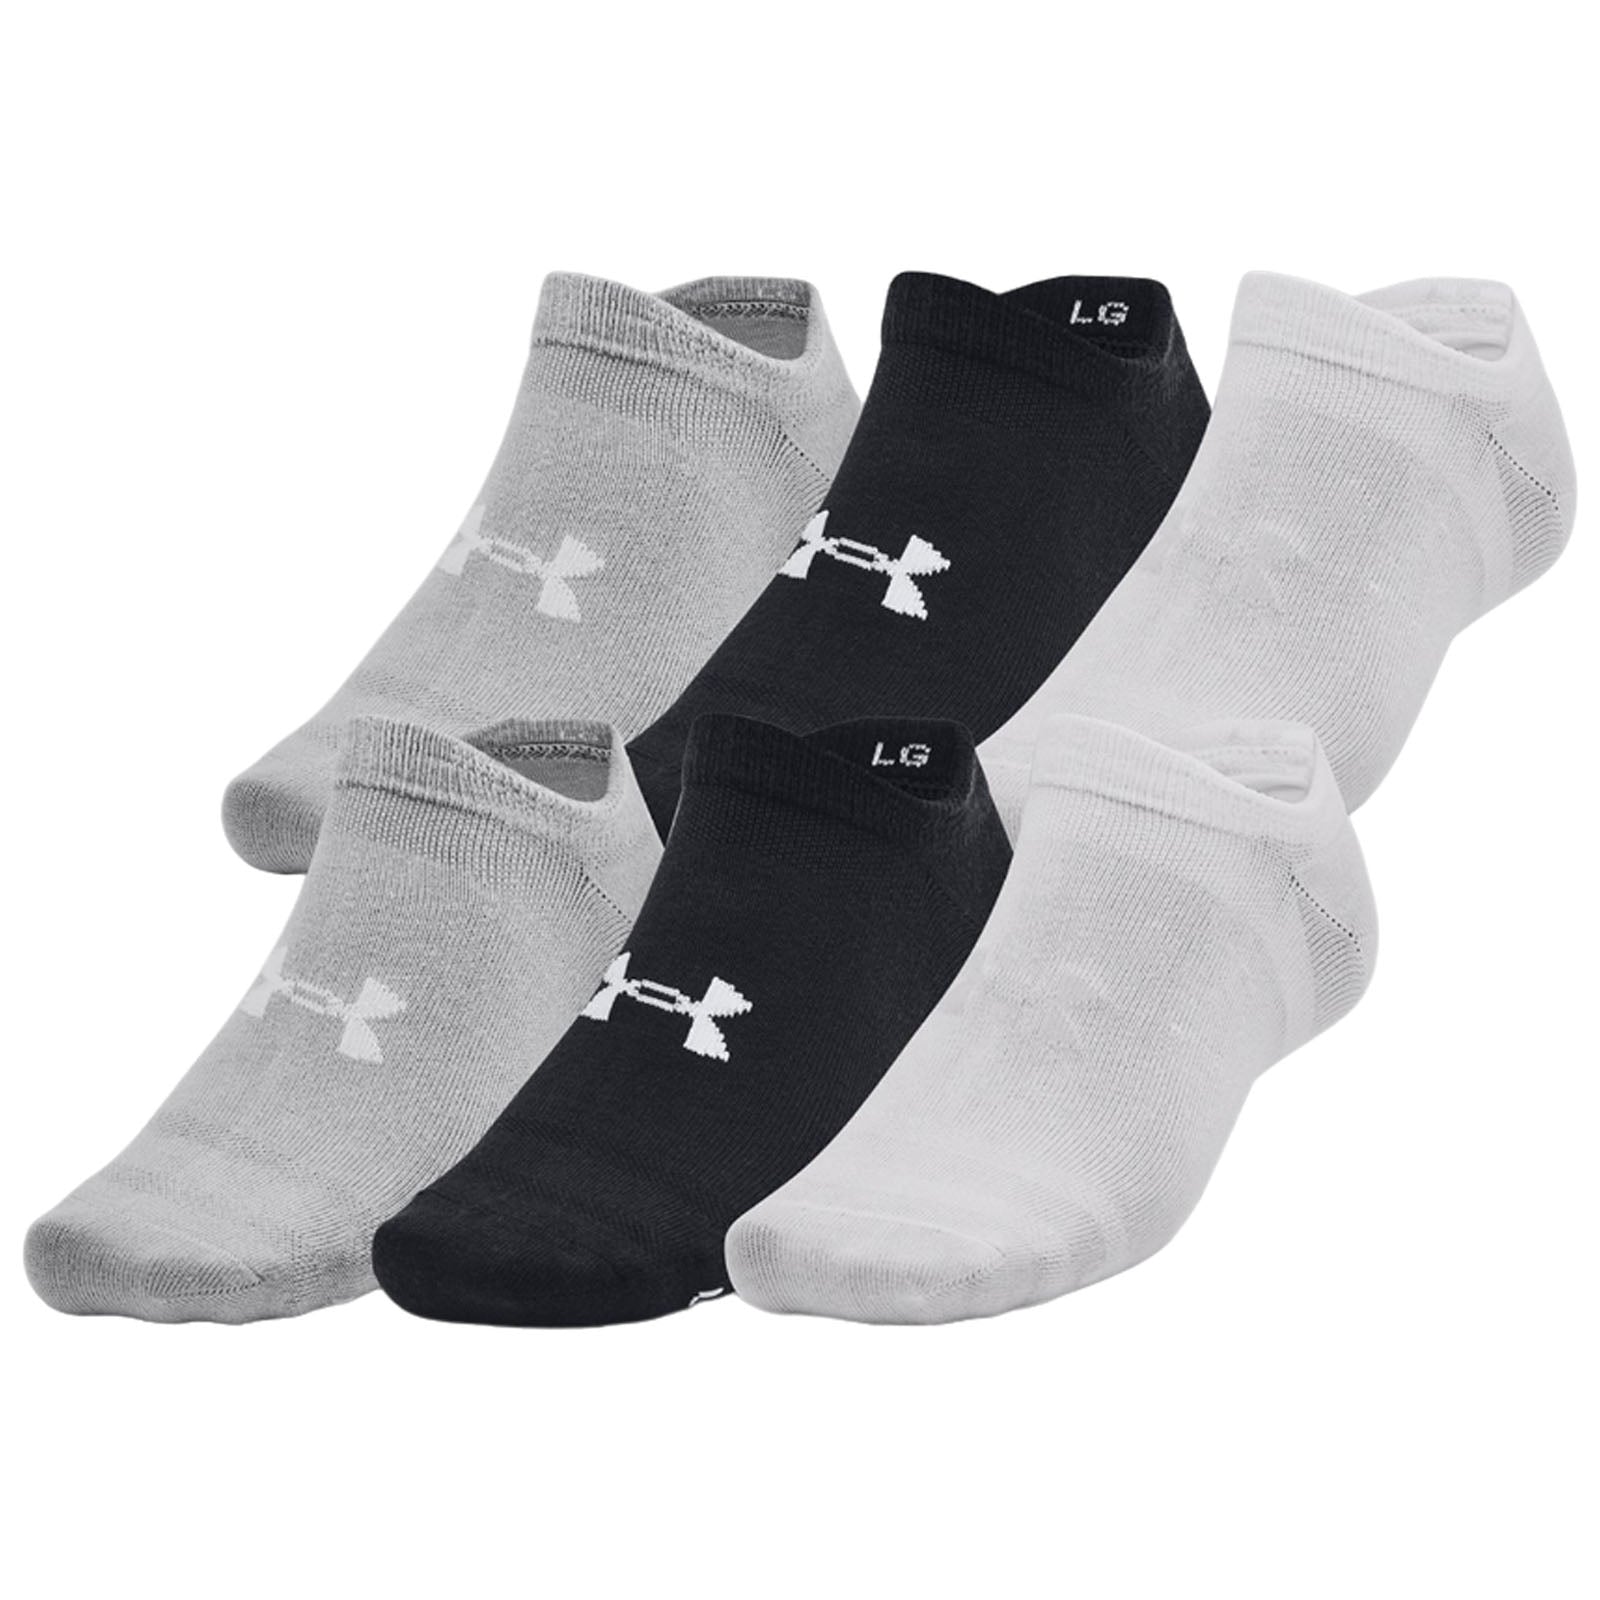 Under Armour Essential No-Show Socks (6 Pairs)